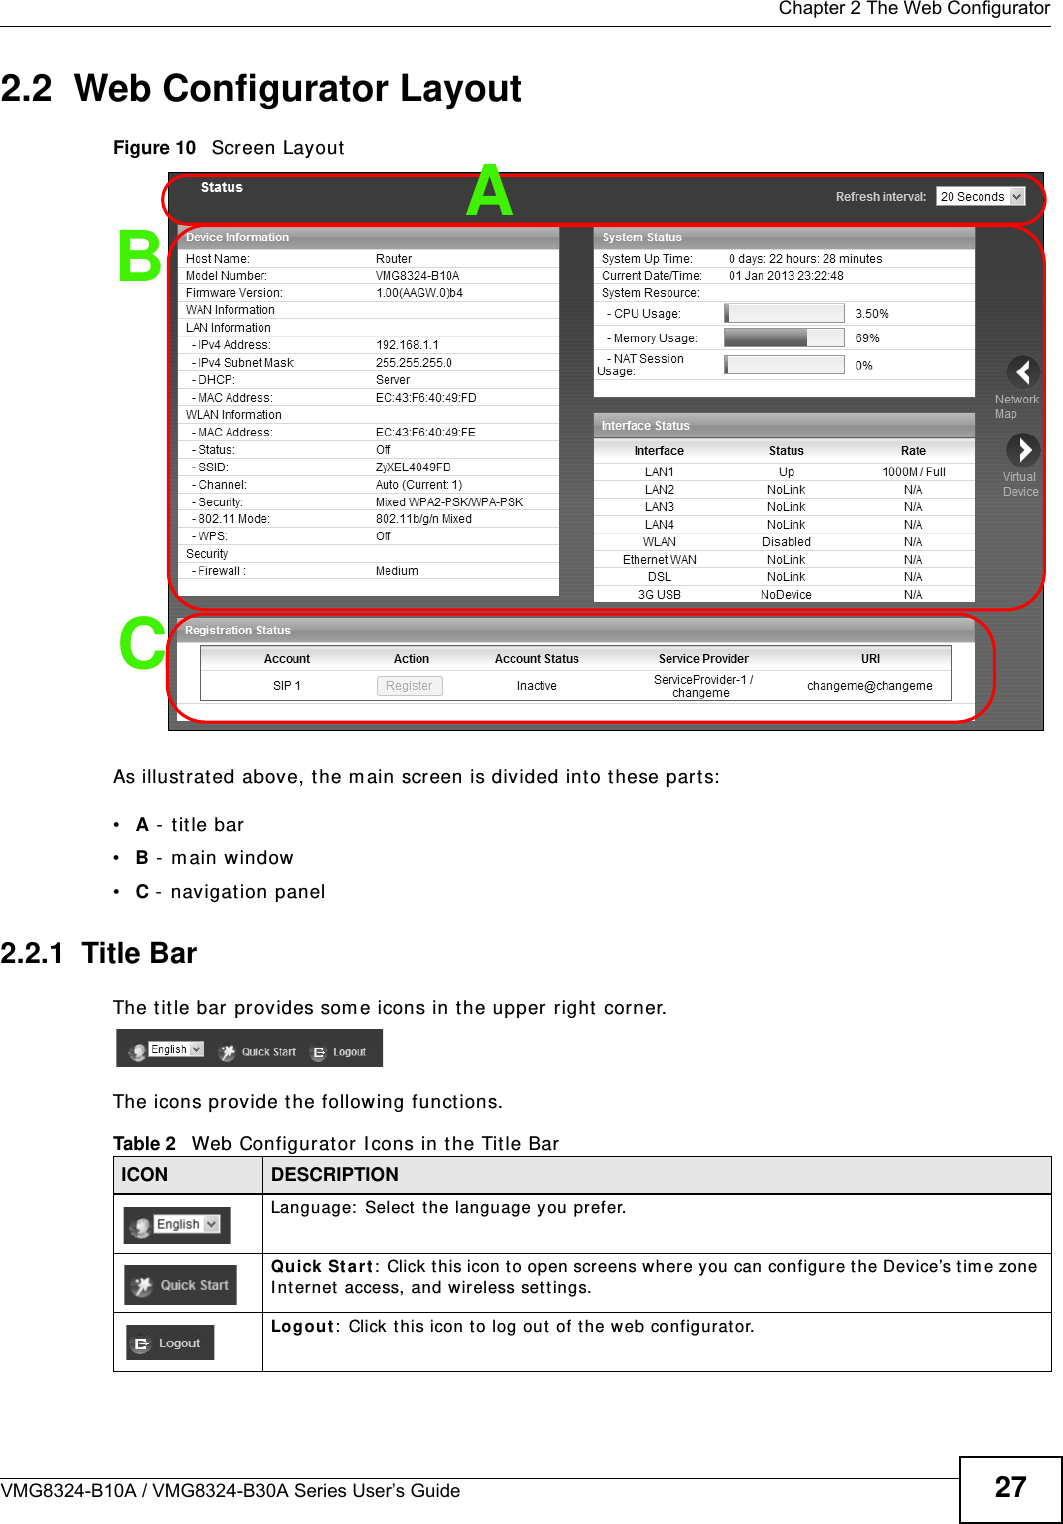  Chapter 2 The Web ConfiguratorVMG8324-B10A / VMG8324-B30A Series User’s Guide 272.2  Web Configurator LayoutFigure 10   Screen LayoutAs illust rat ed above, t he m ain screen is divided into these part s:•A -  t itle bar•B -  m ain window •C -  navigat ion panel2.2.1  Title BarThe t itle bar provides som e icons in the upper right  corner.The icons provide the following functions.BCATable 2   Web Configurat or I cons in t he Tit le BarICON  DESCRIPTIONLanguage:  Select  t he language you prefer.Quick Start :  Click t his icon t o open screens where you can configur e t he Device’s t im e zone I nt ernet  access, and wireless set t ings.Logout :  Click t his icon t o log out of the web configurator.